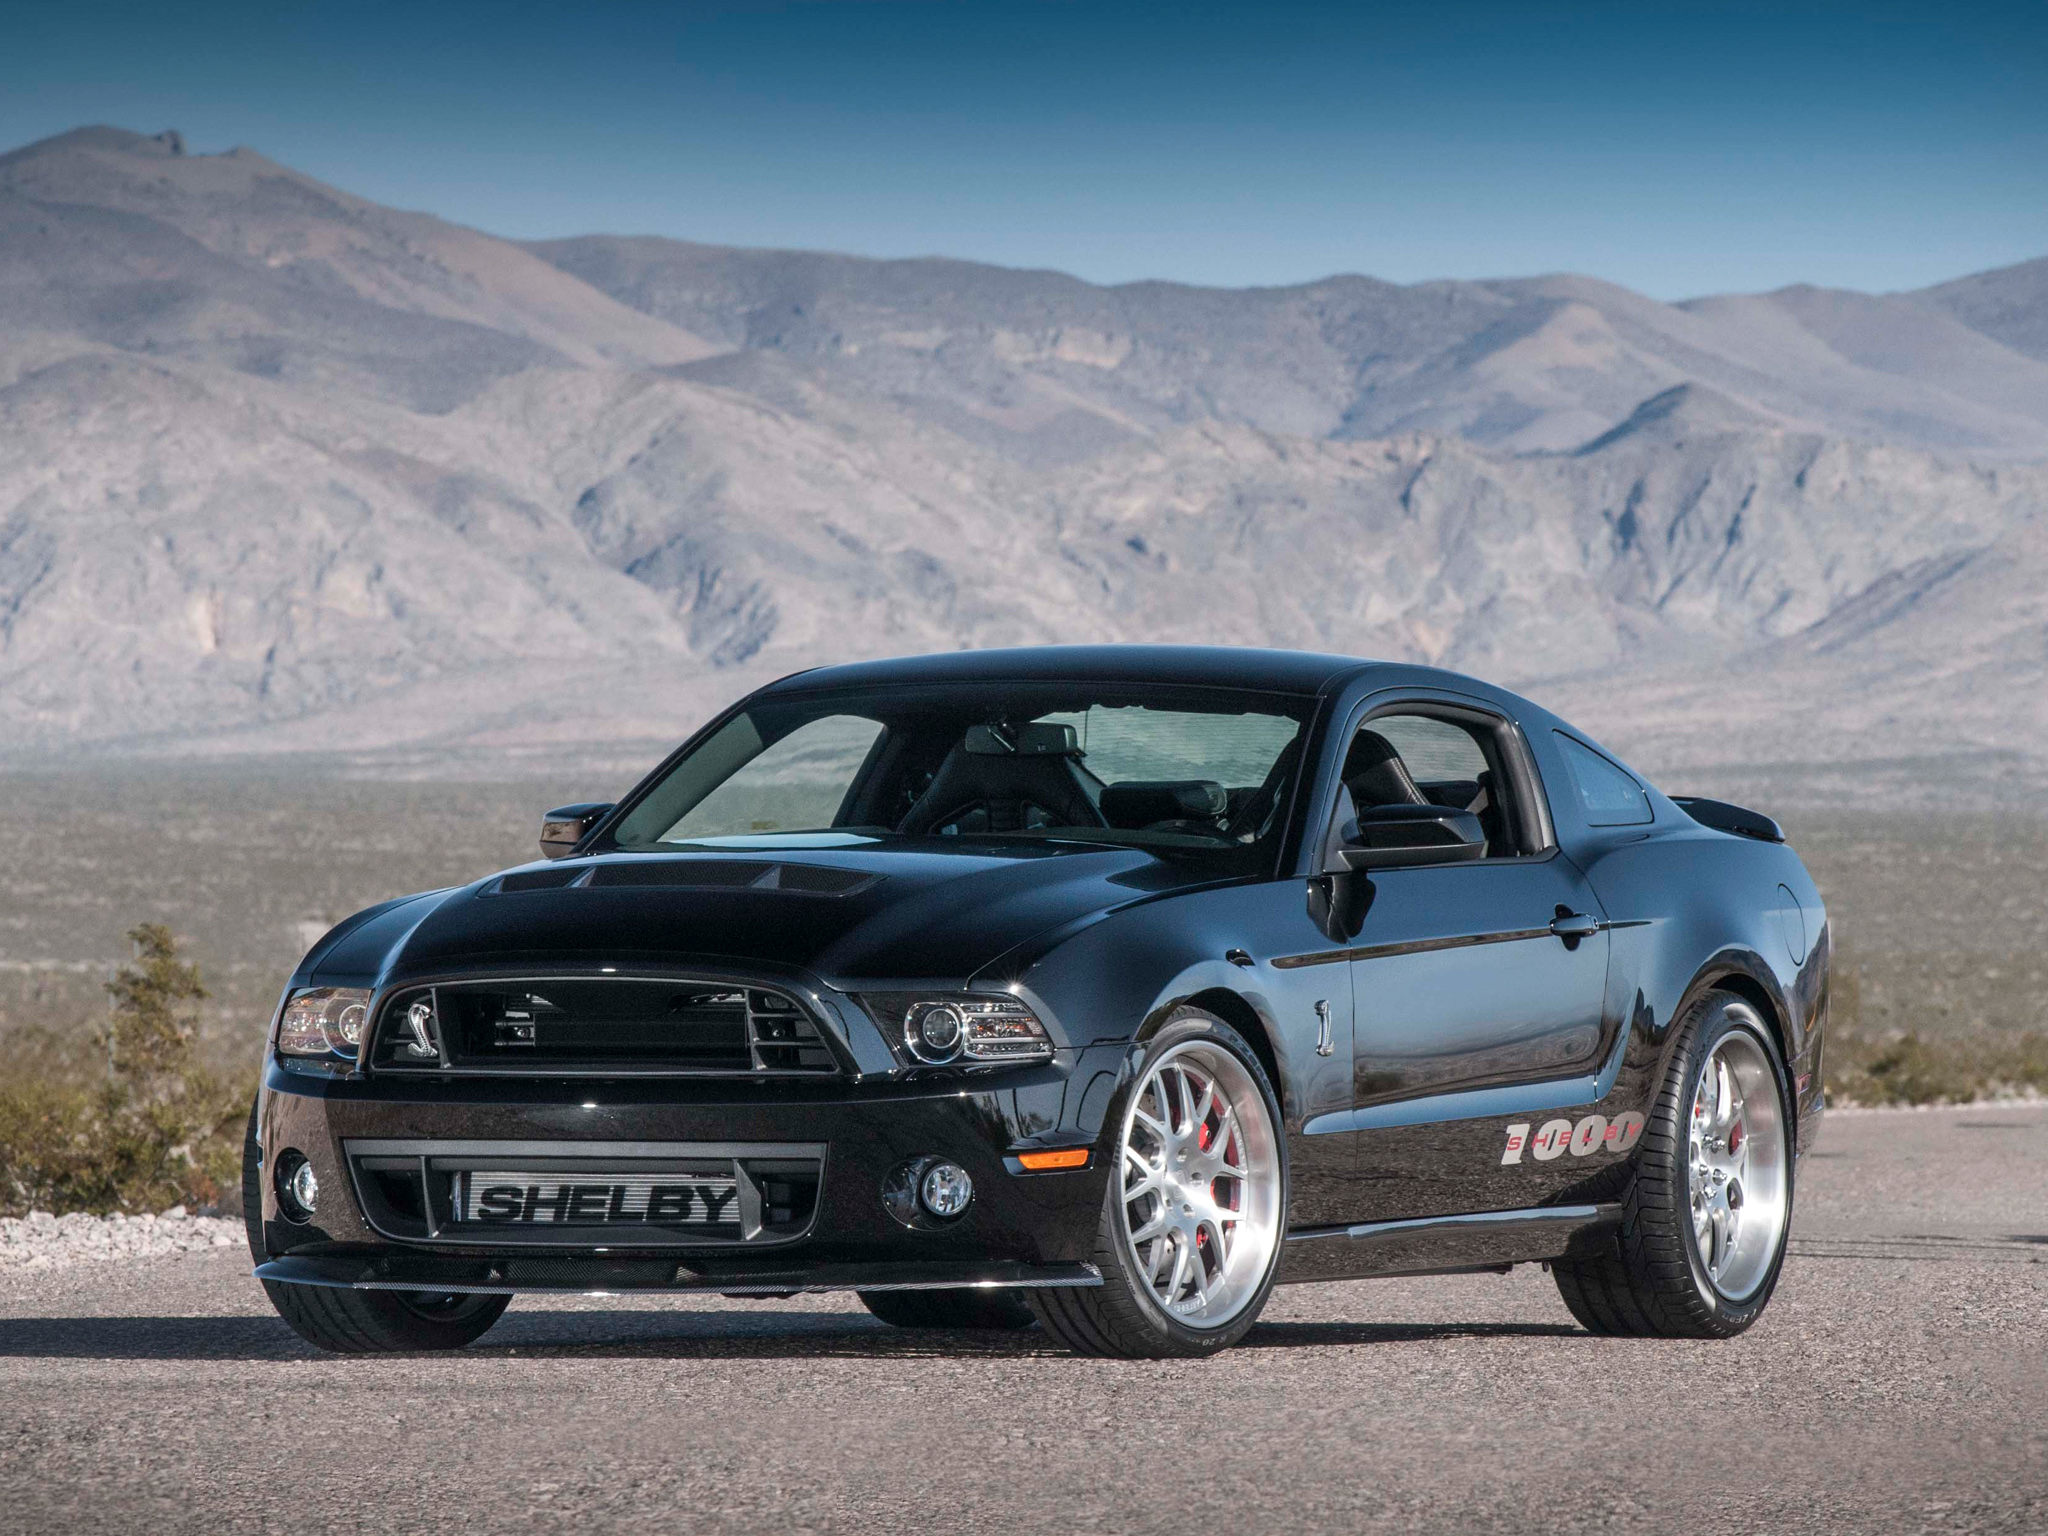 2013, Ford, Mustang, Shelby, 1000, Muscle, Supercar, Supercars, Hot, Rod, Rods Wallpaper